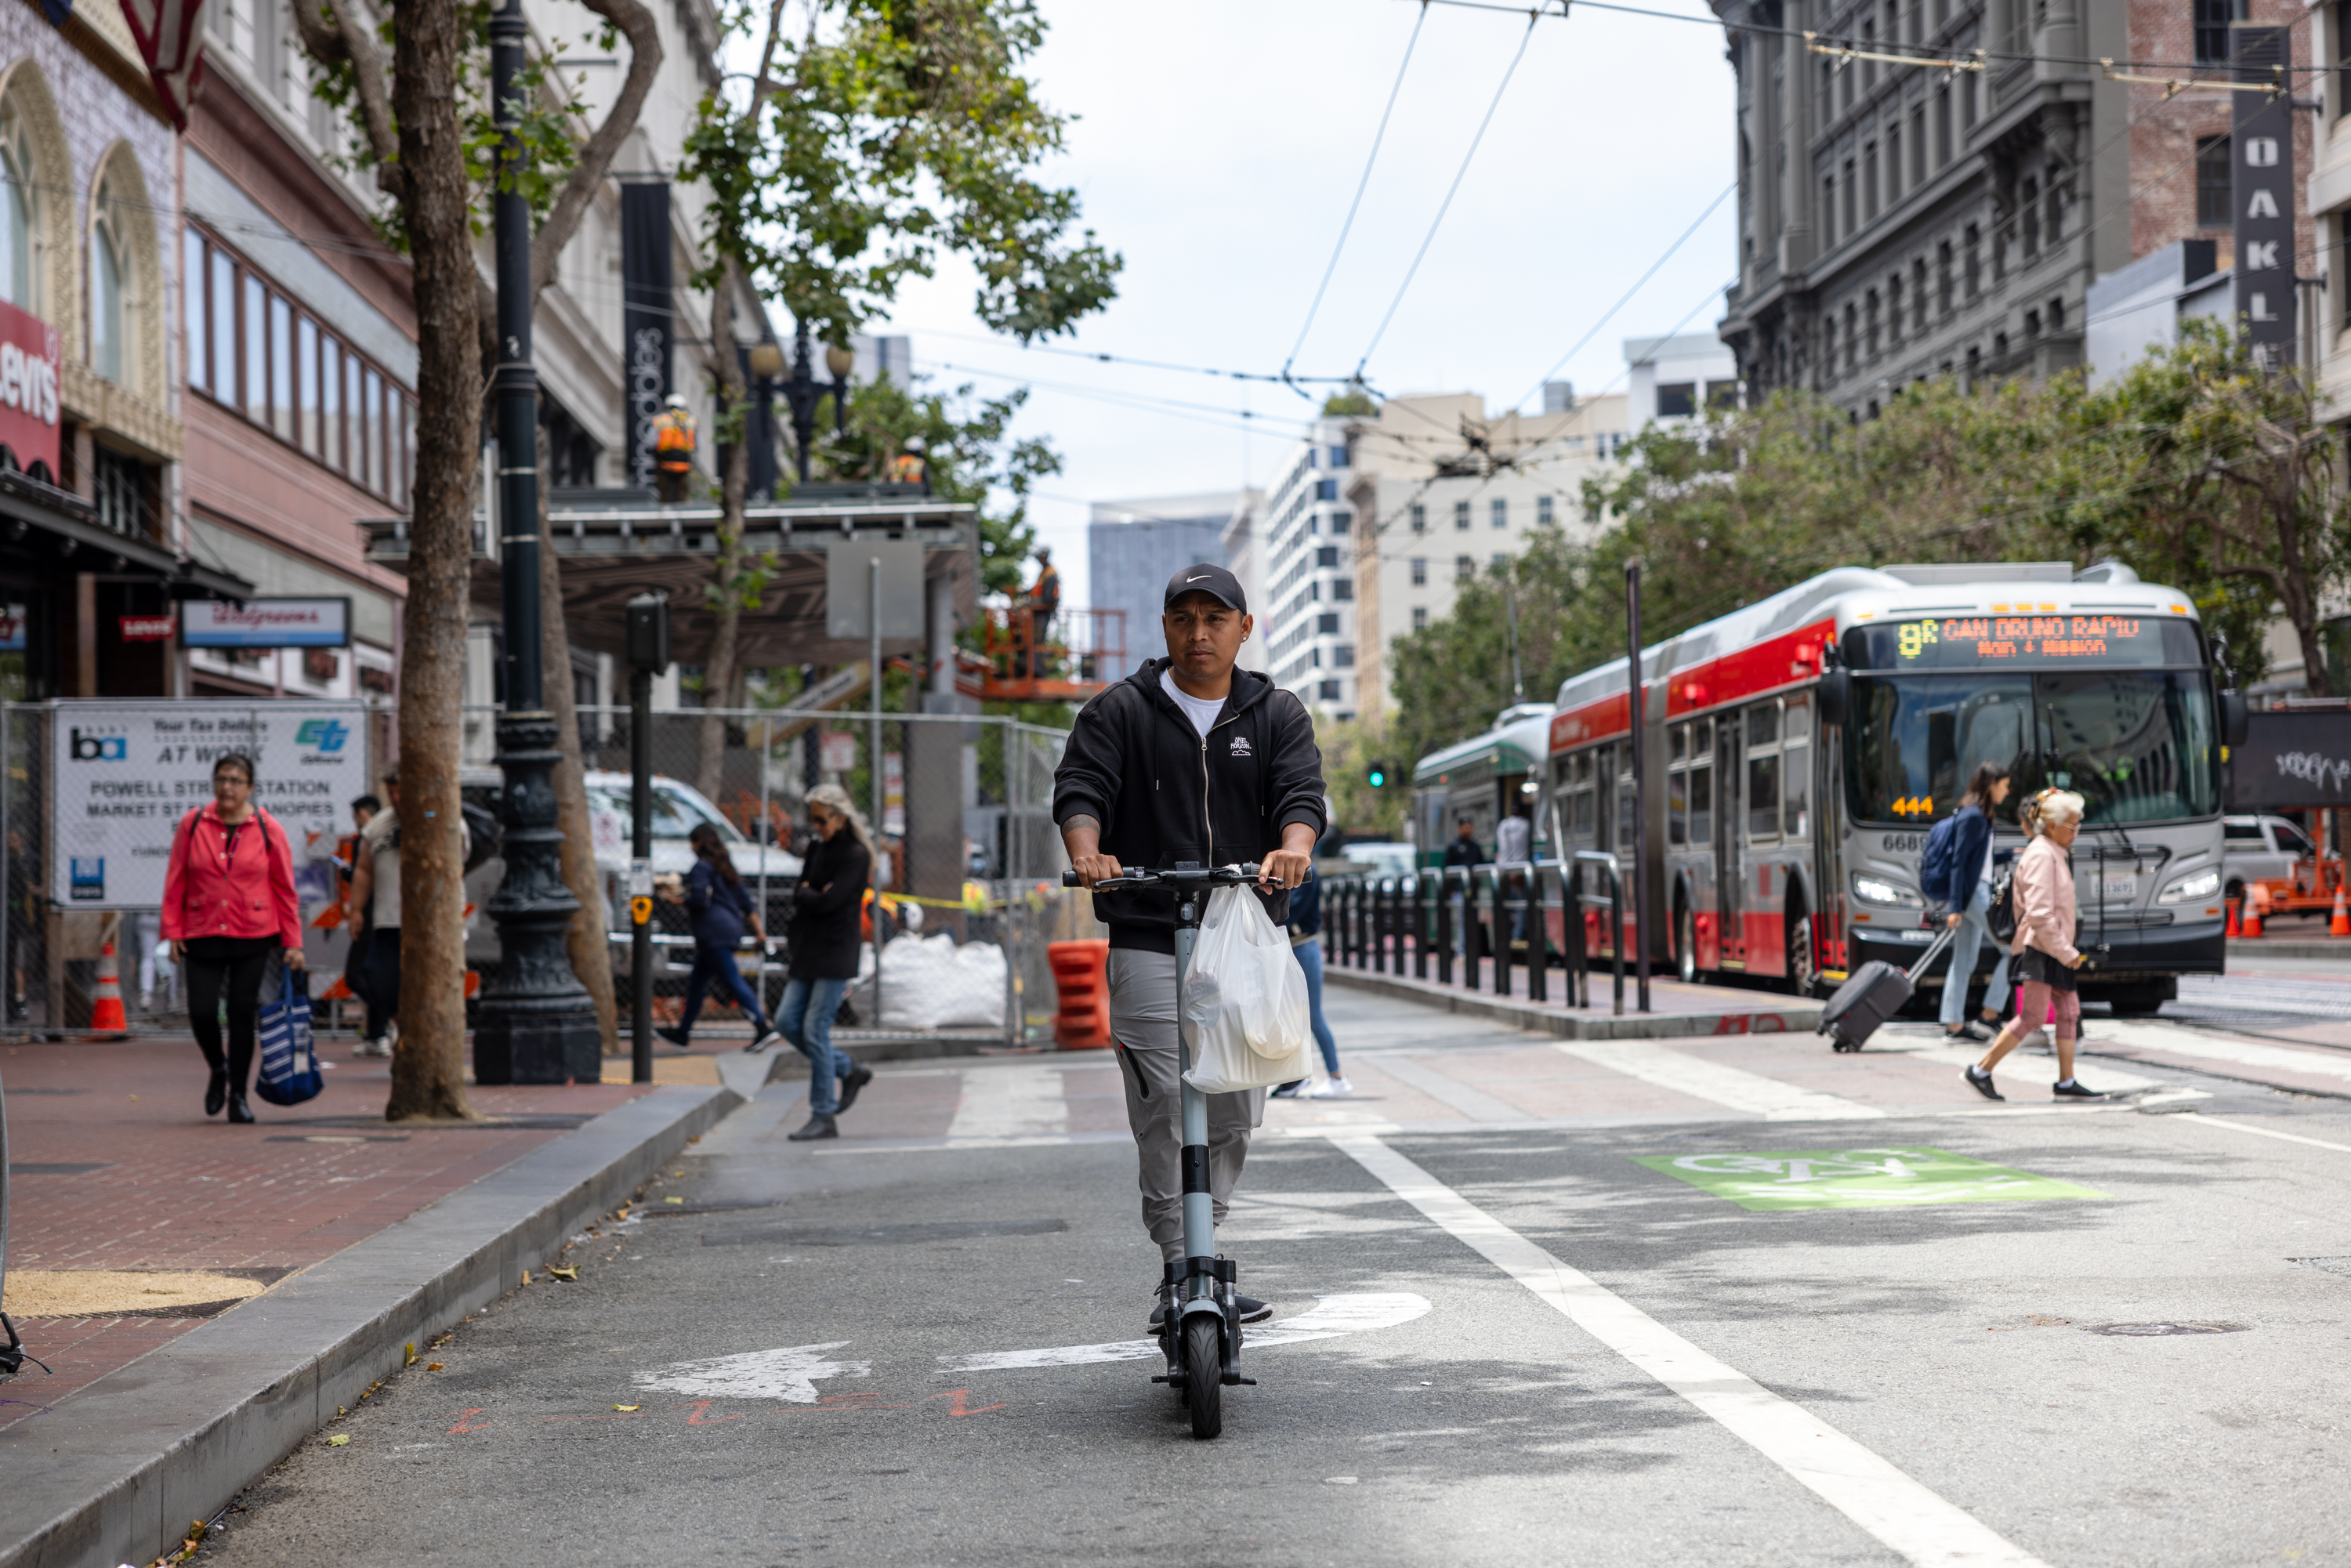 San Francisco’s Market Street Is Still Under Construction. What’s Being Done?